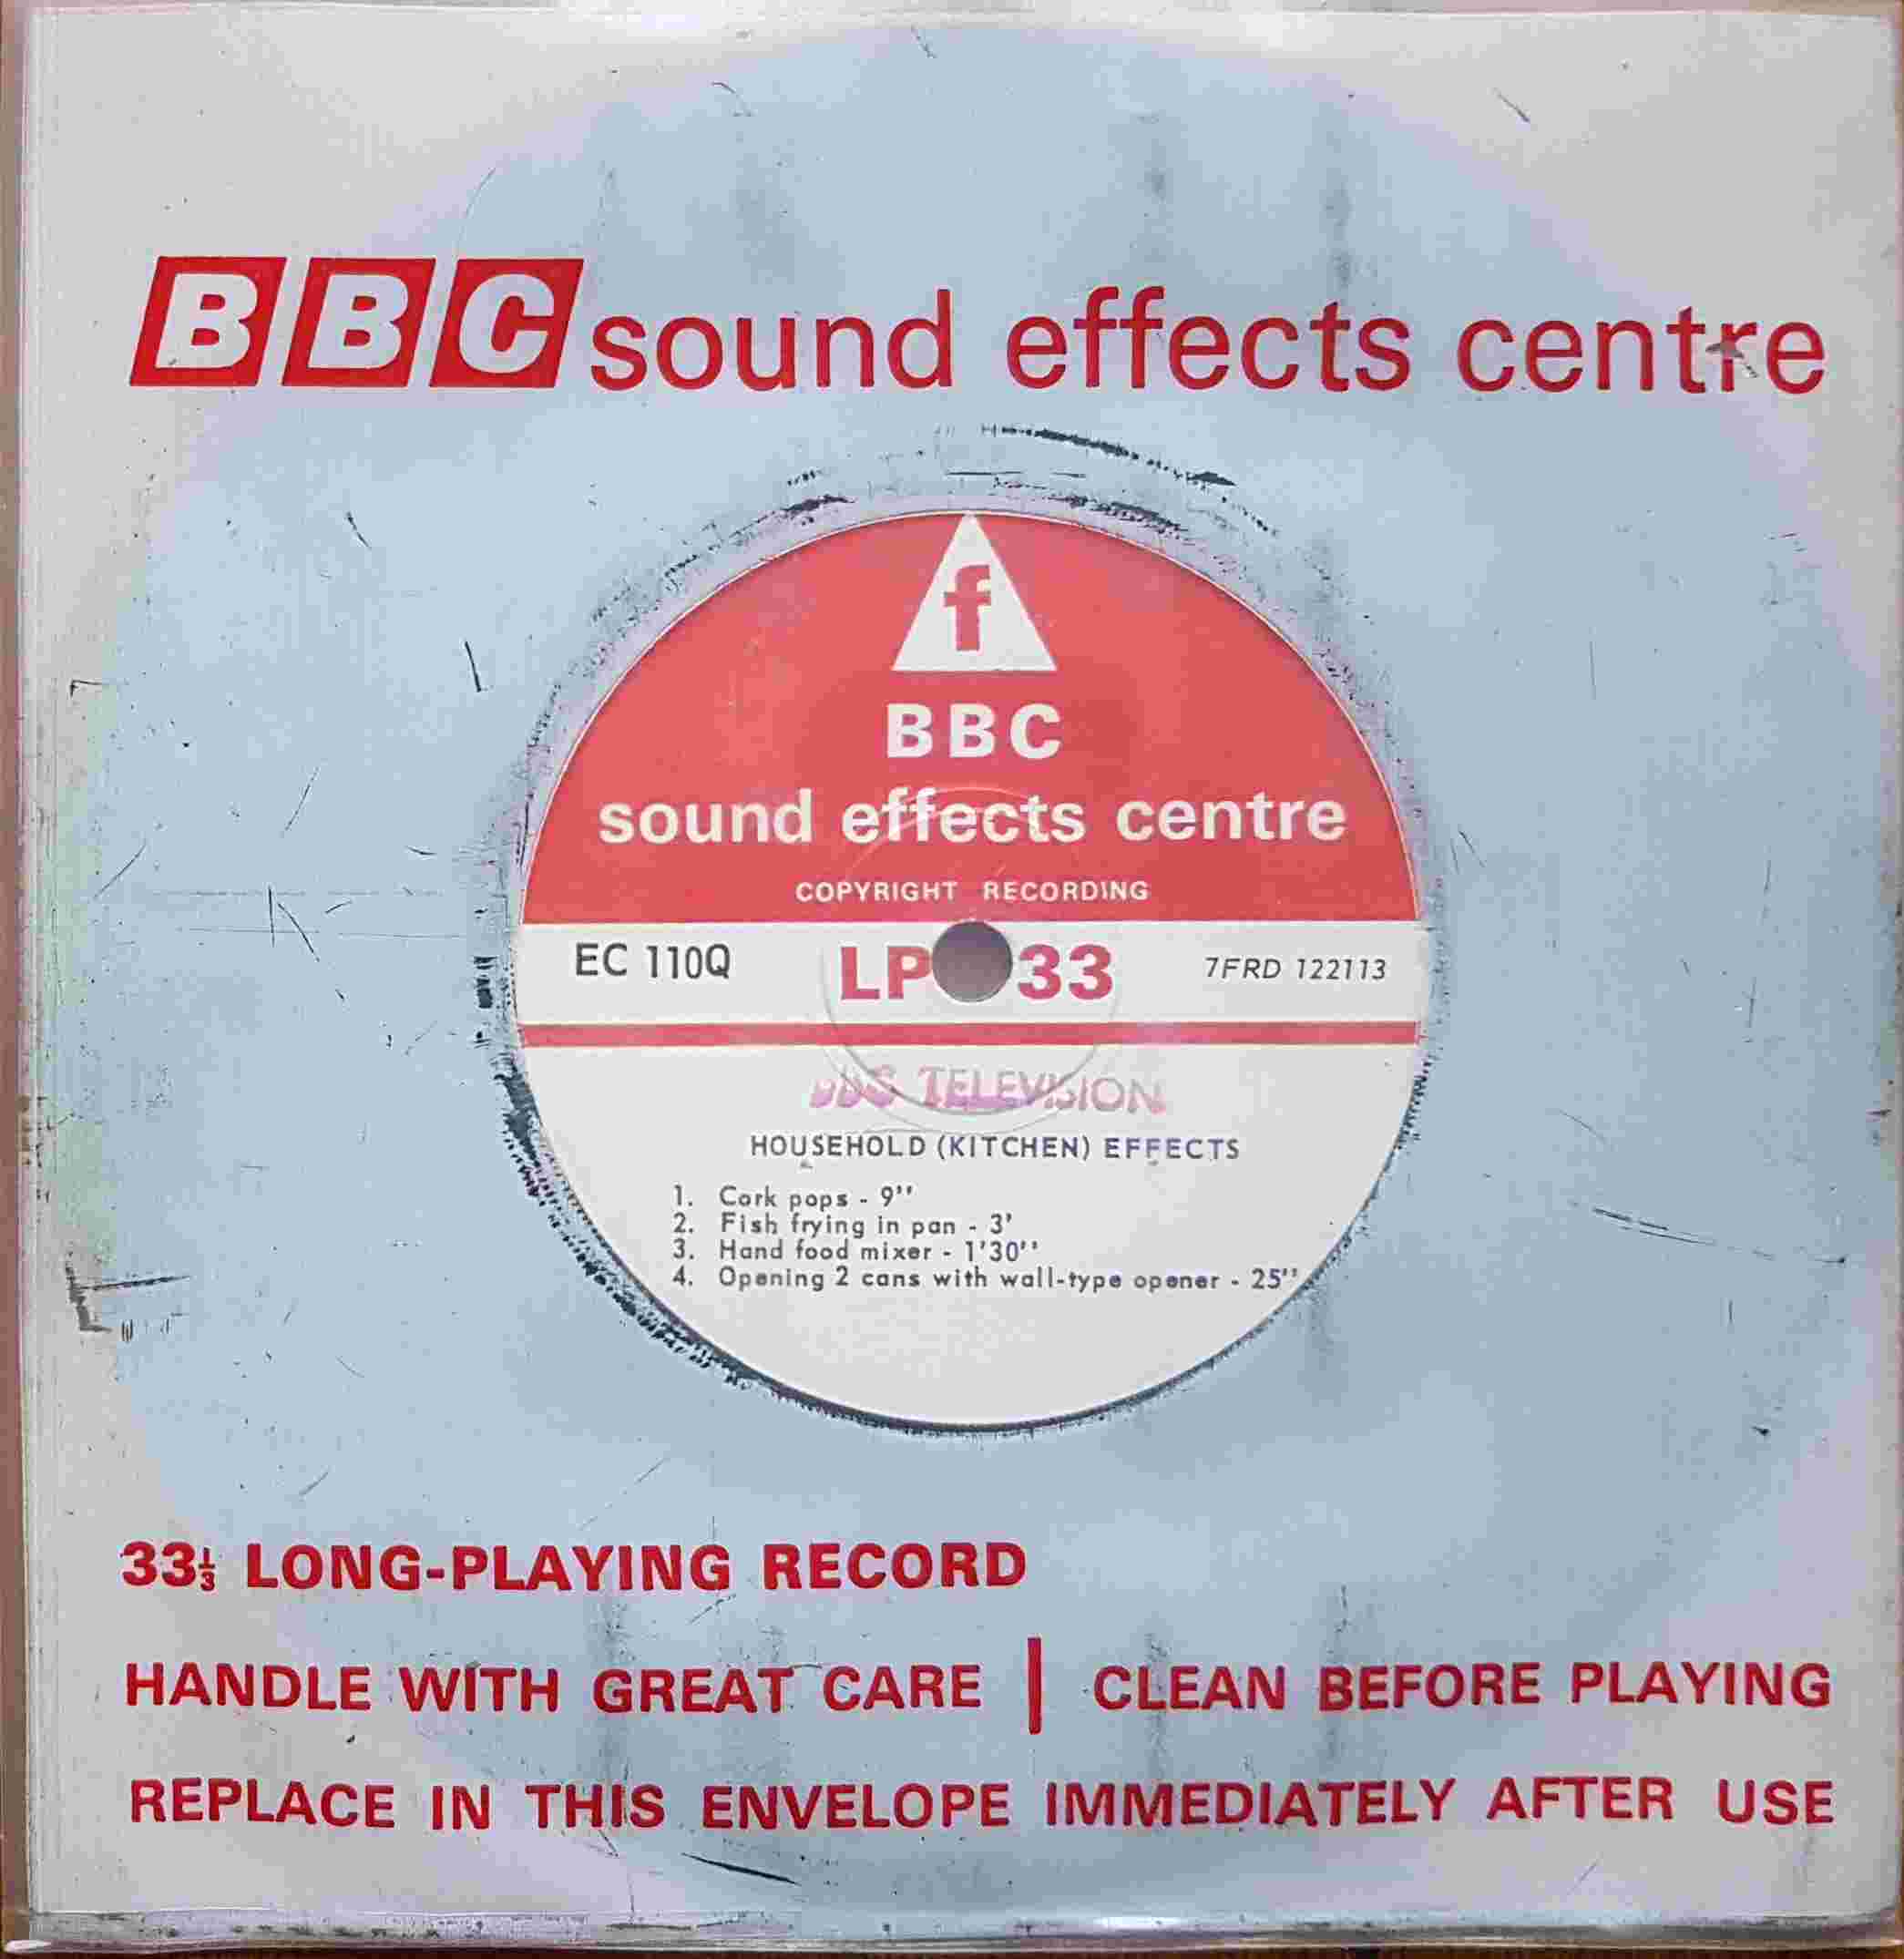 Picture of EC 110Q Household (Kitchen) effects by artist Not registered from the BBC singles - Records and Tapes library